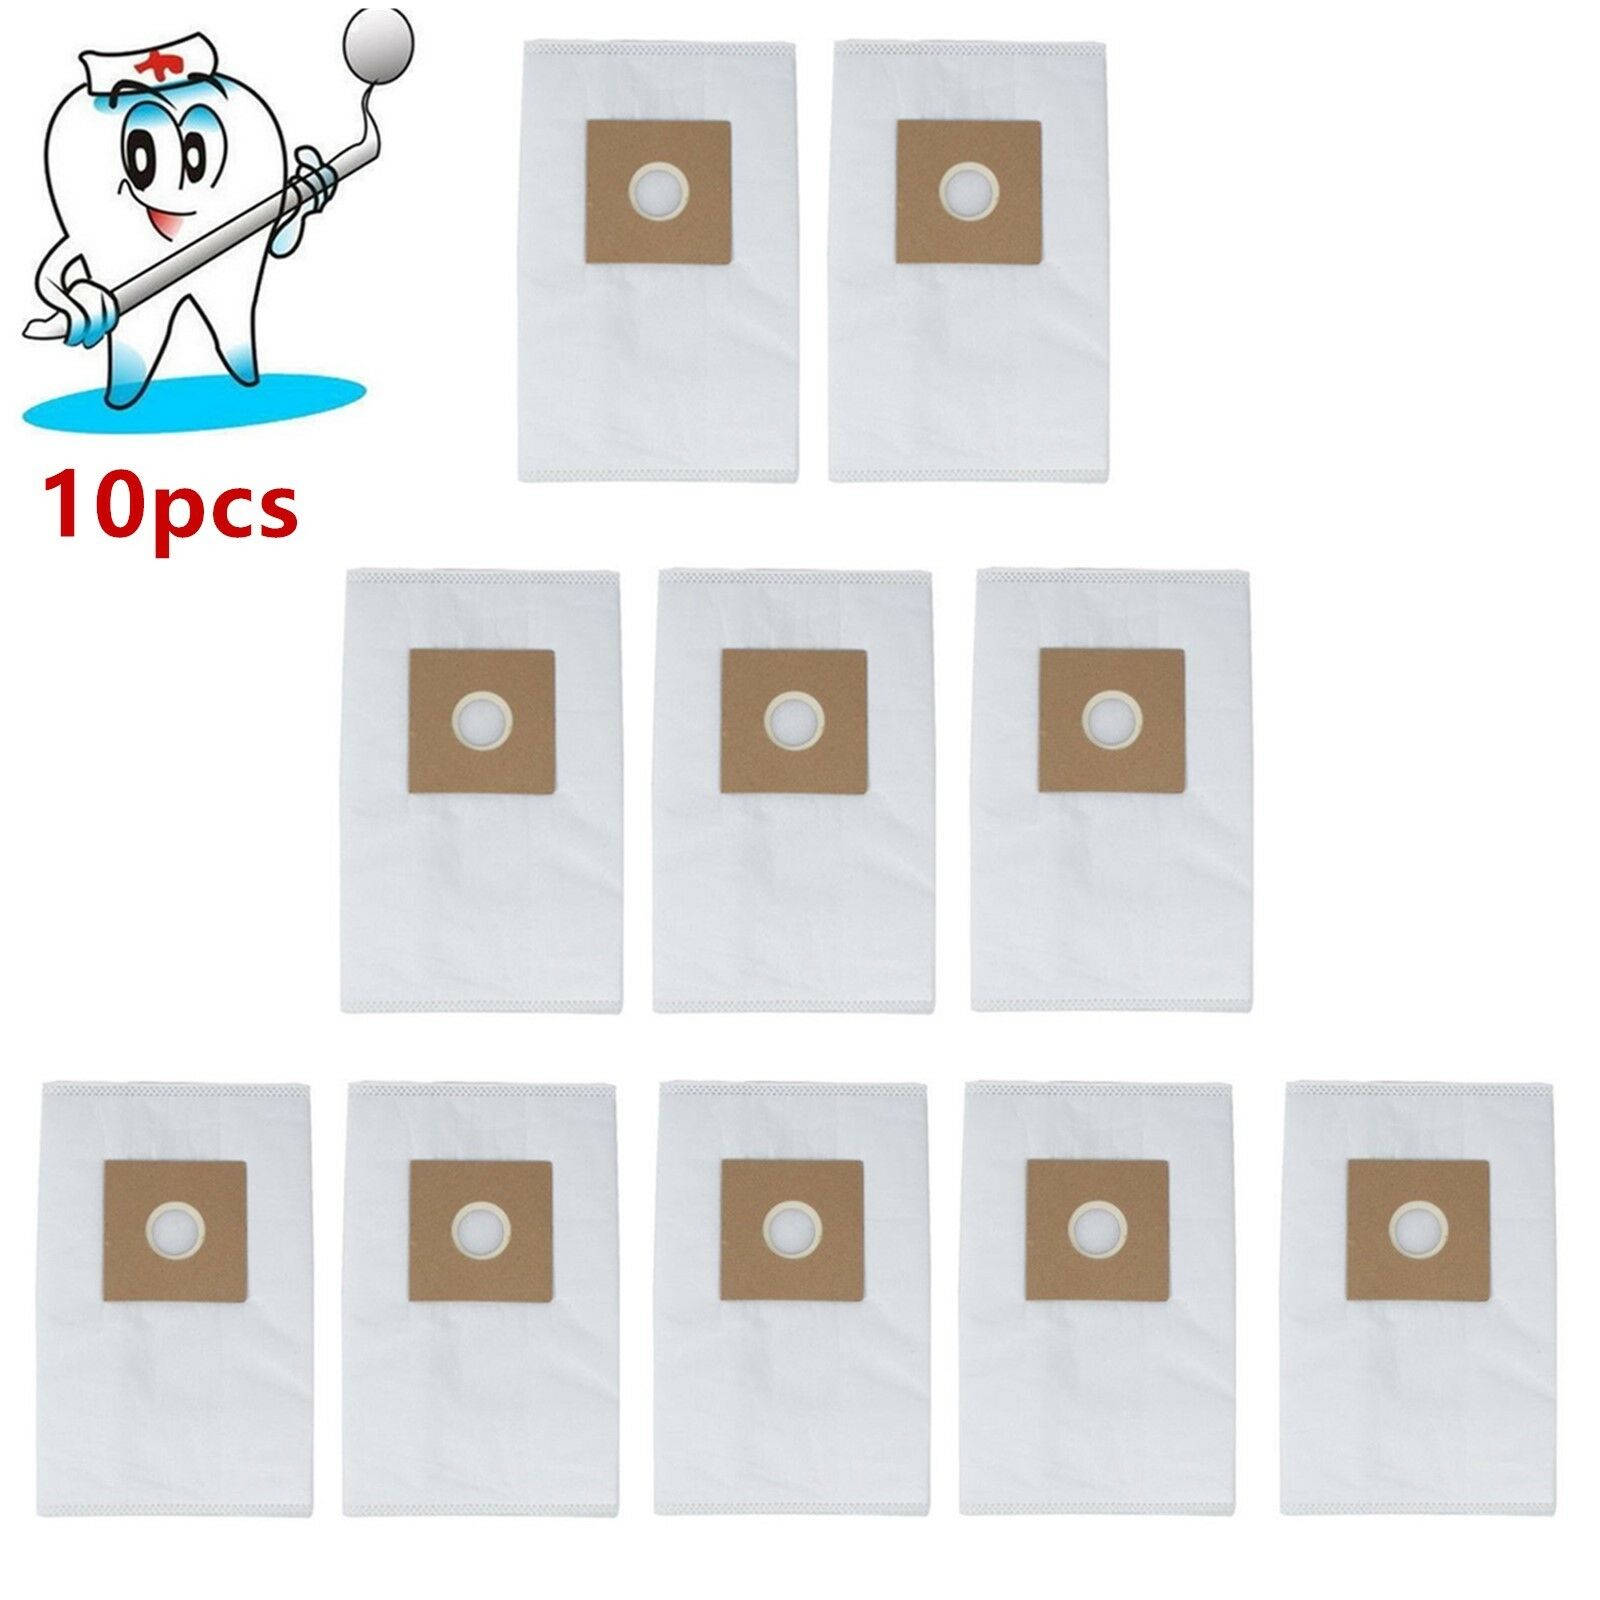 10PCS Filter Dust Cotton Bags For Dental Lab Dust Collector Vacuum Cleaner New